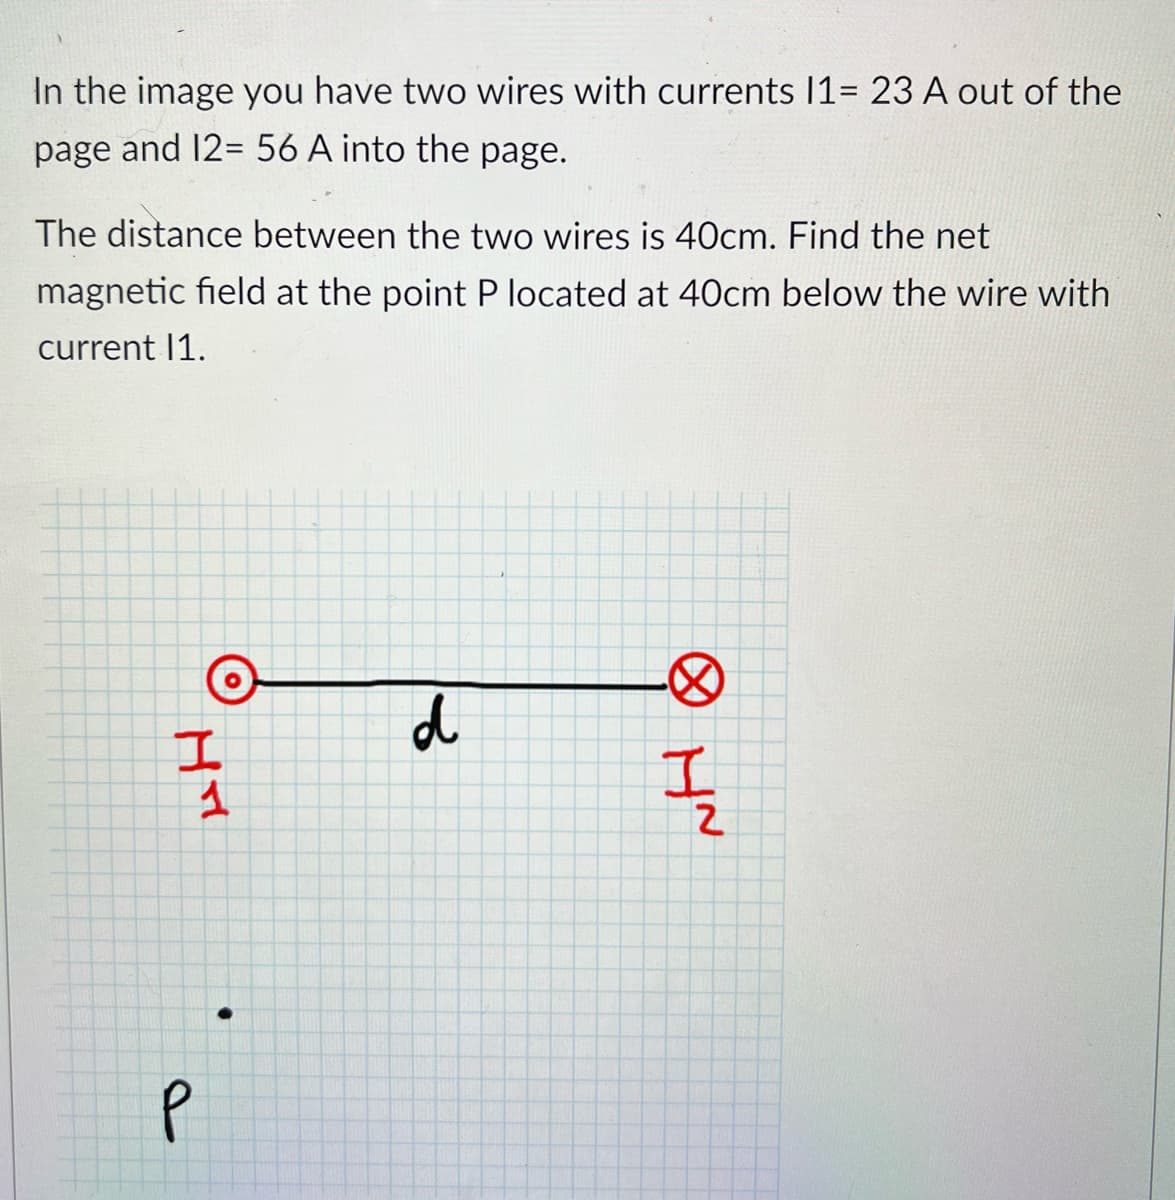 In the image you have two wires with currents 11= 23 A out of the
page and 12=56 A into the page.
The distance between the two wires is 40cm. Find the net
magnetic field at the point P located at 40cm below the wire with
current 11.
P
I
ㄒㄧㄚˇ
1
d
NH ⑧
Z
I